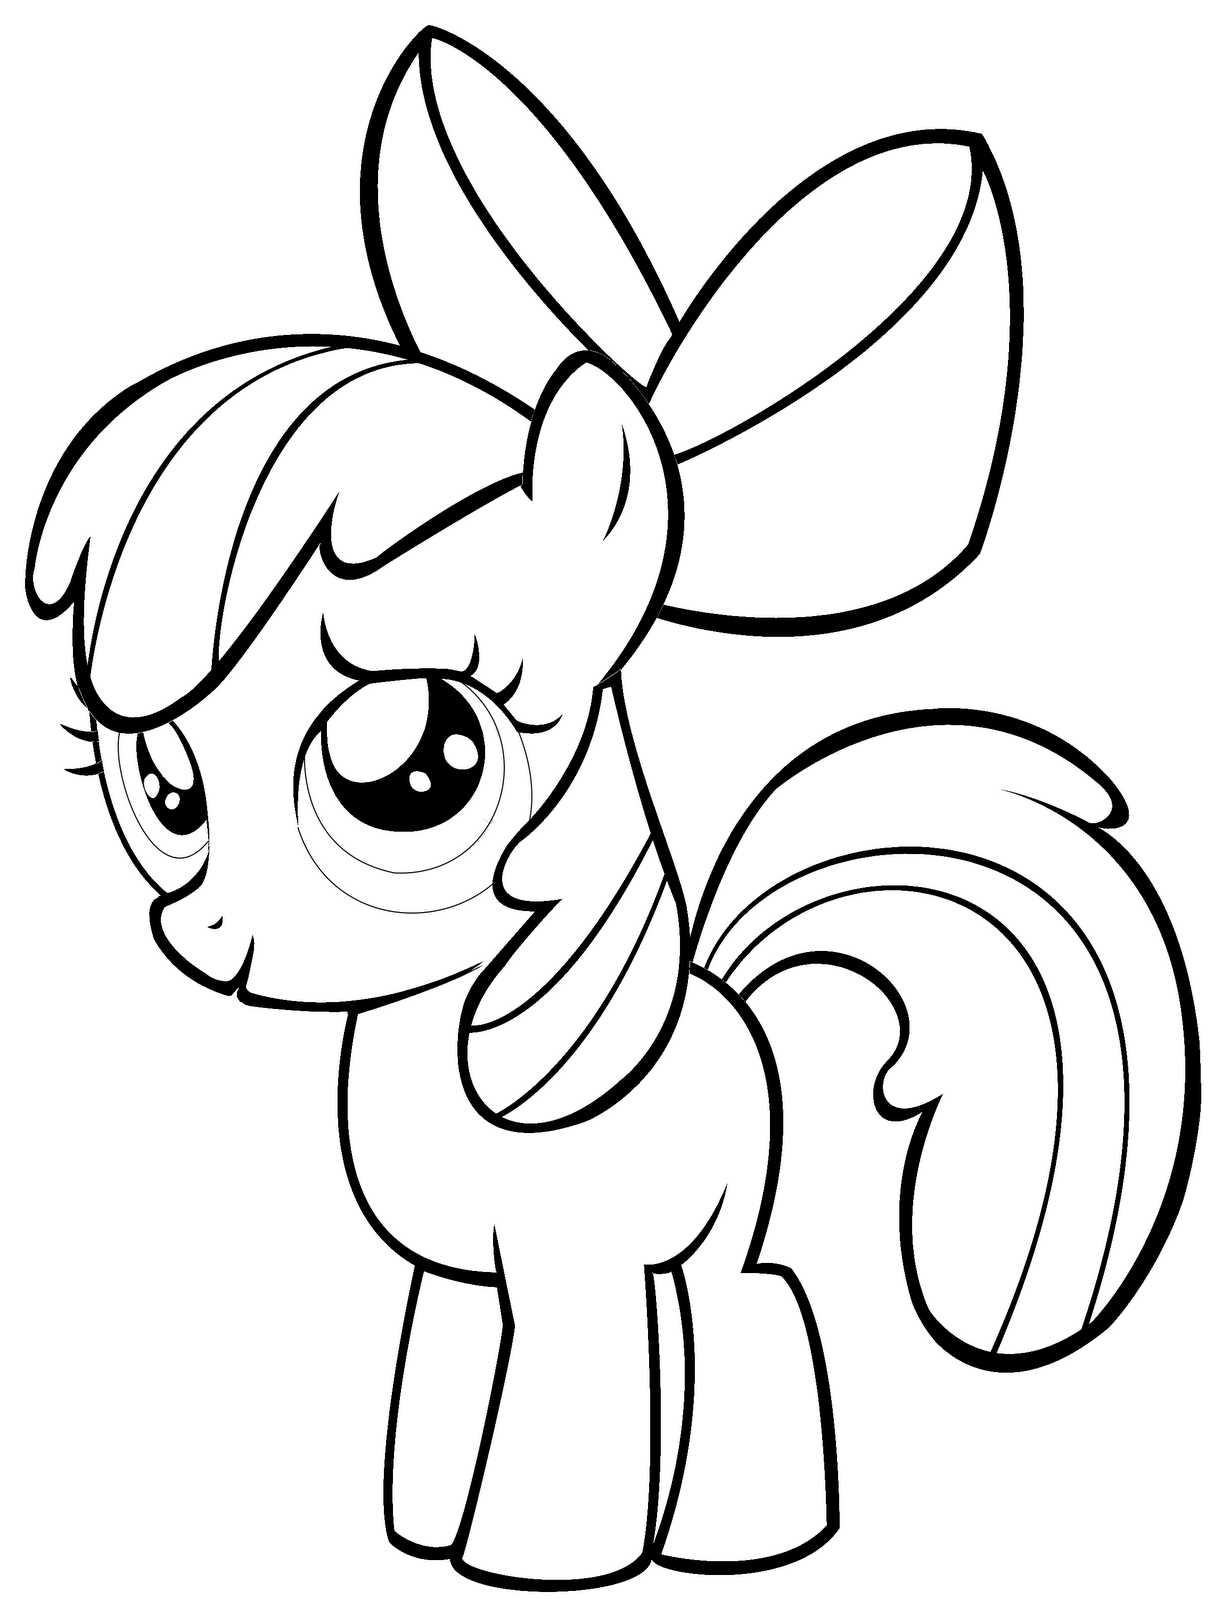 my little pony apple bloom coloring pages my little pony apple bloom coloring pages apple little my pony bloom pages coloring 